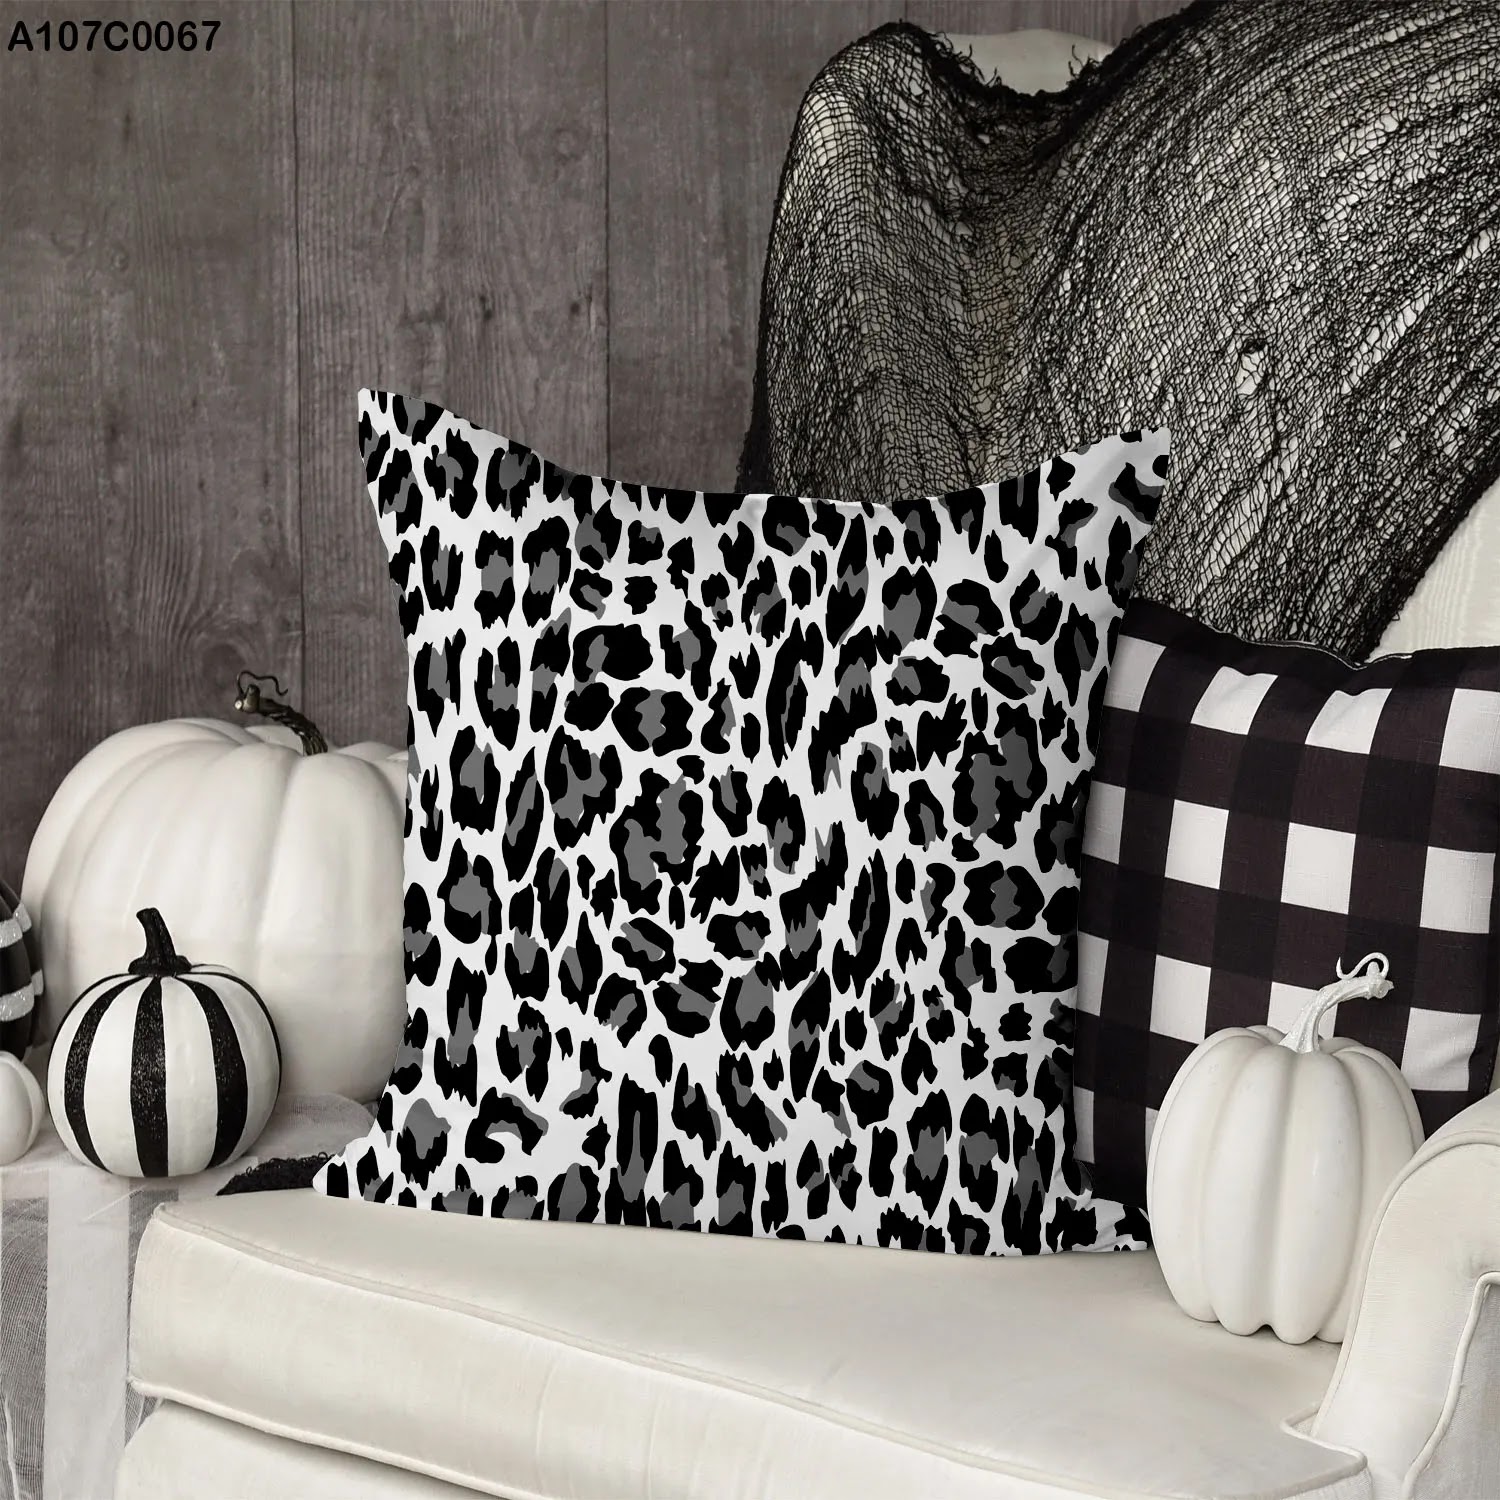 Pillow case with small black & white Leopard skin pattern